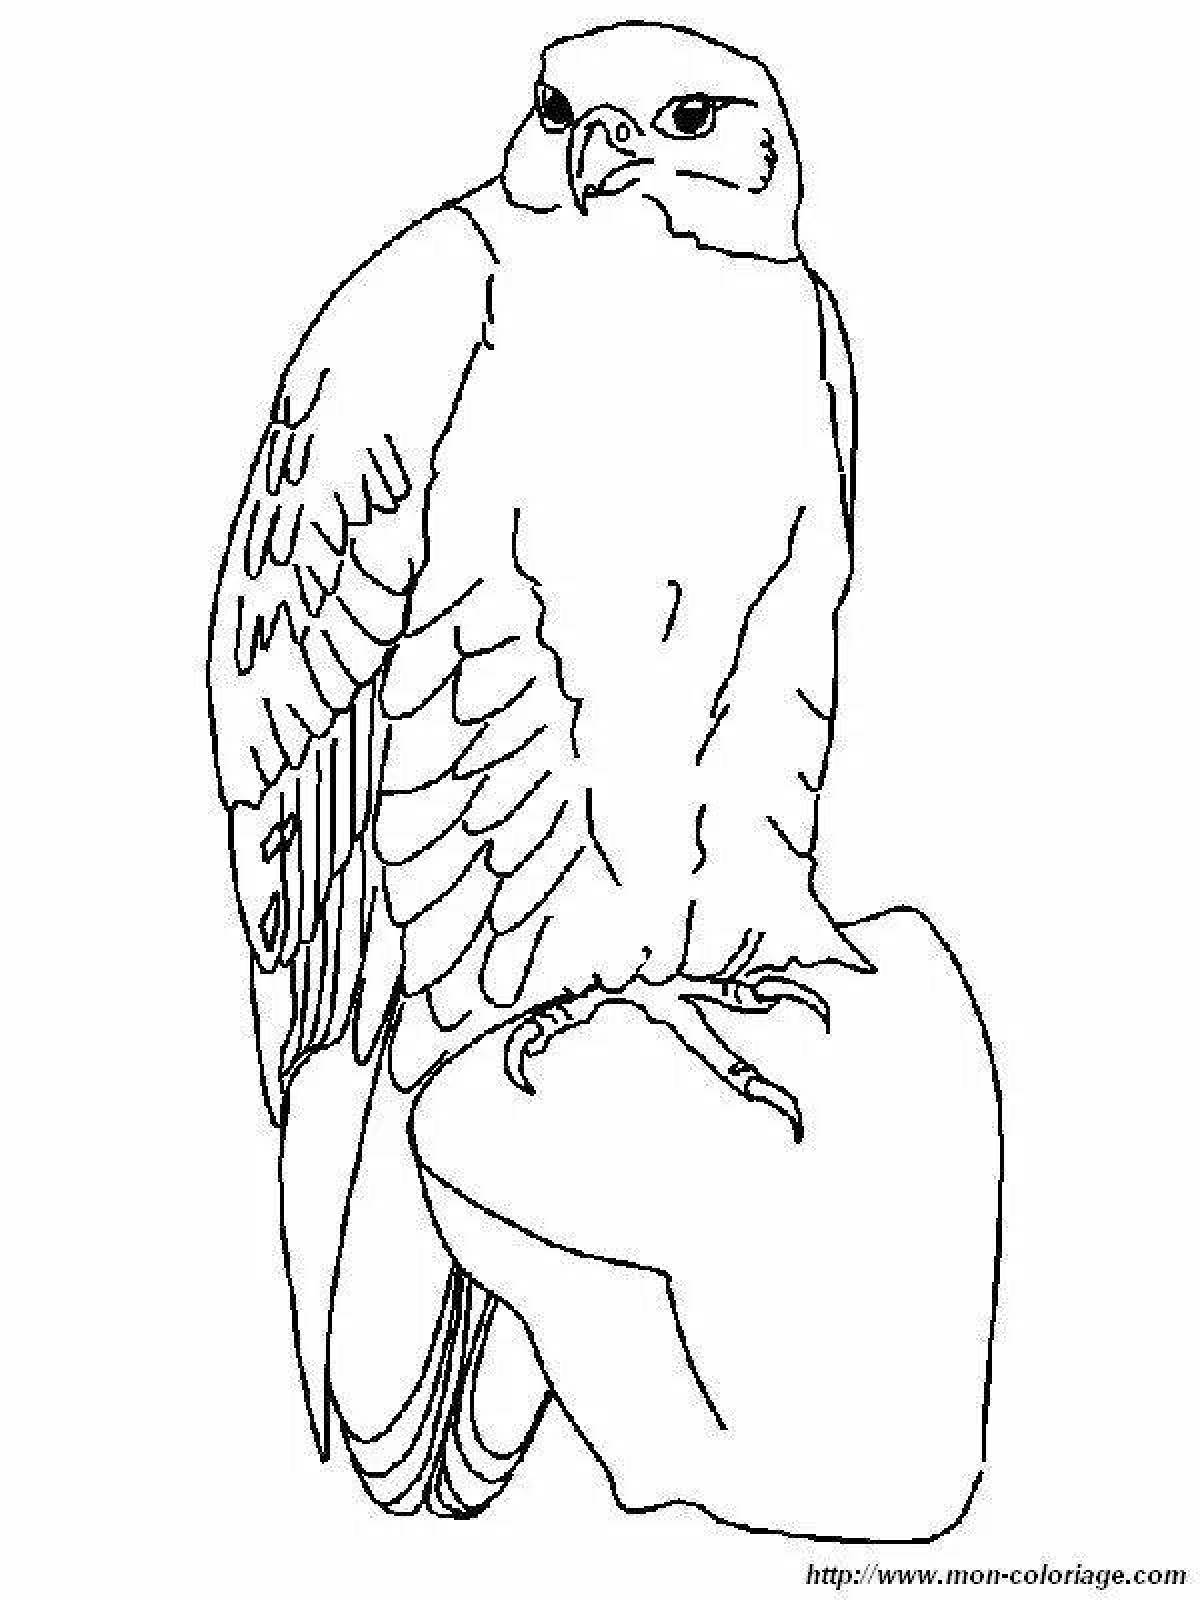 Glorious falcon coloring page